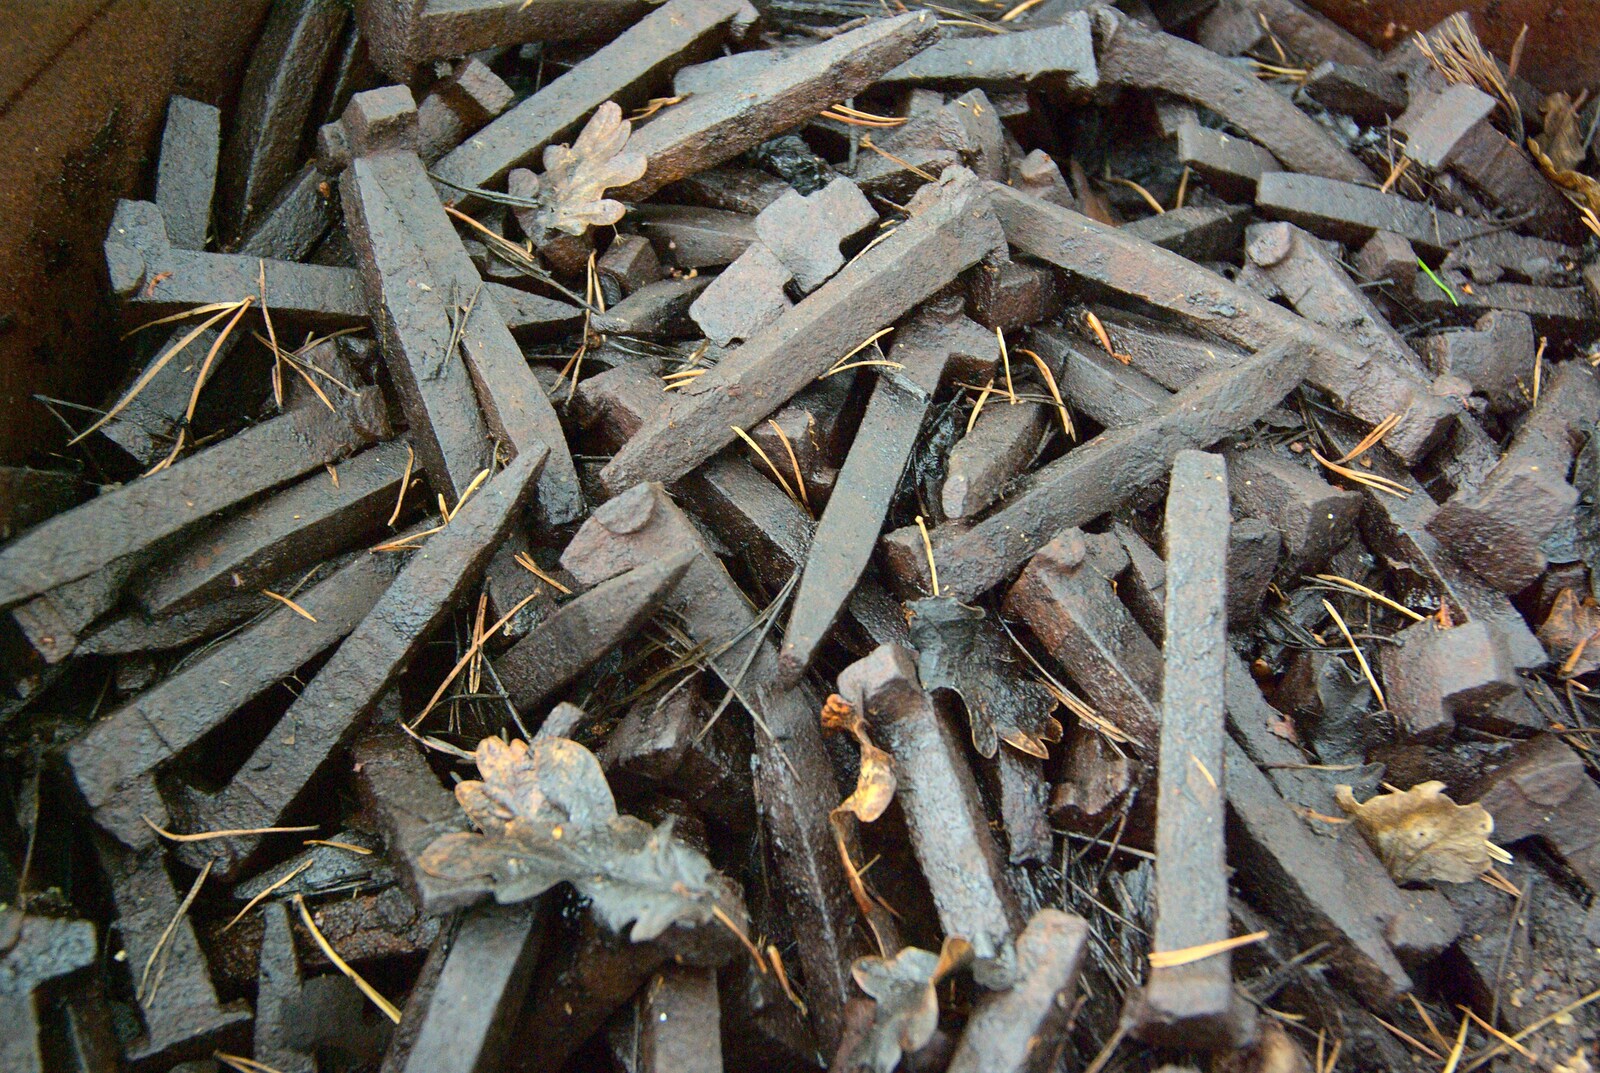 A pile of rail spikes from A Few Hours at the Bressingham Steam Museum, Bressingham, Norfolk - 2nd July 2011